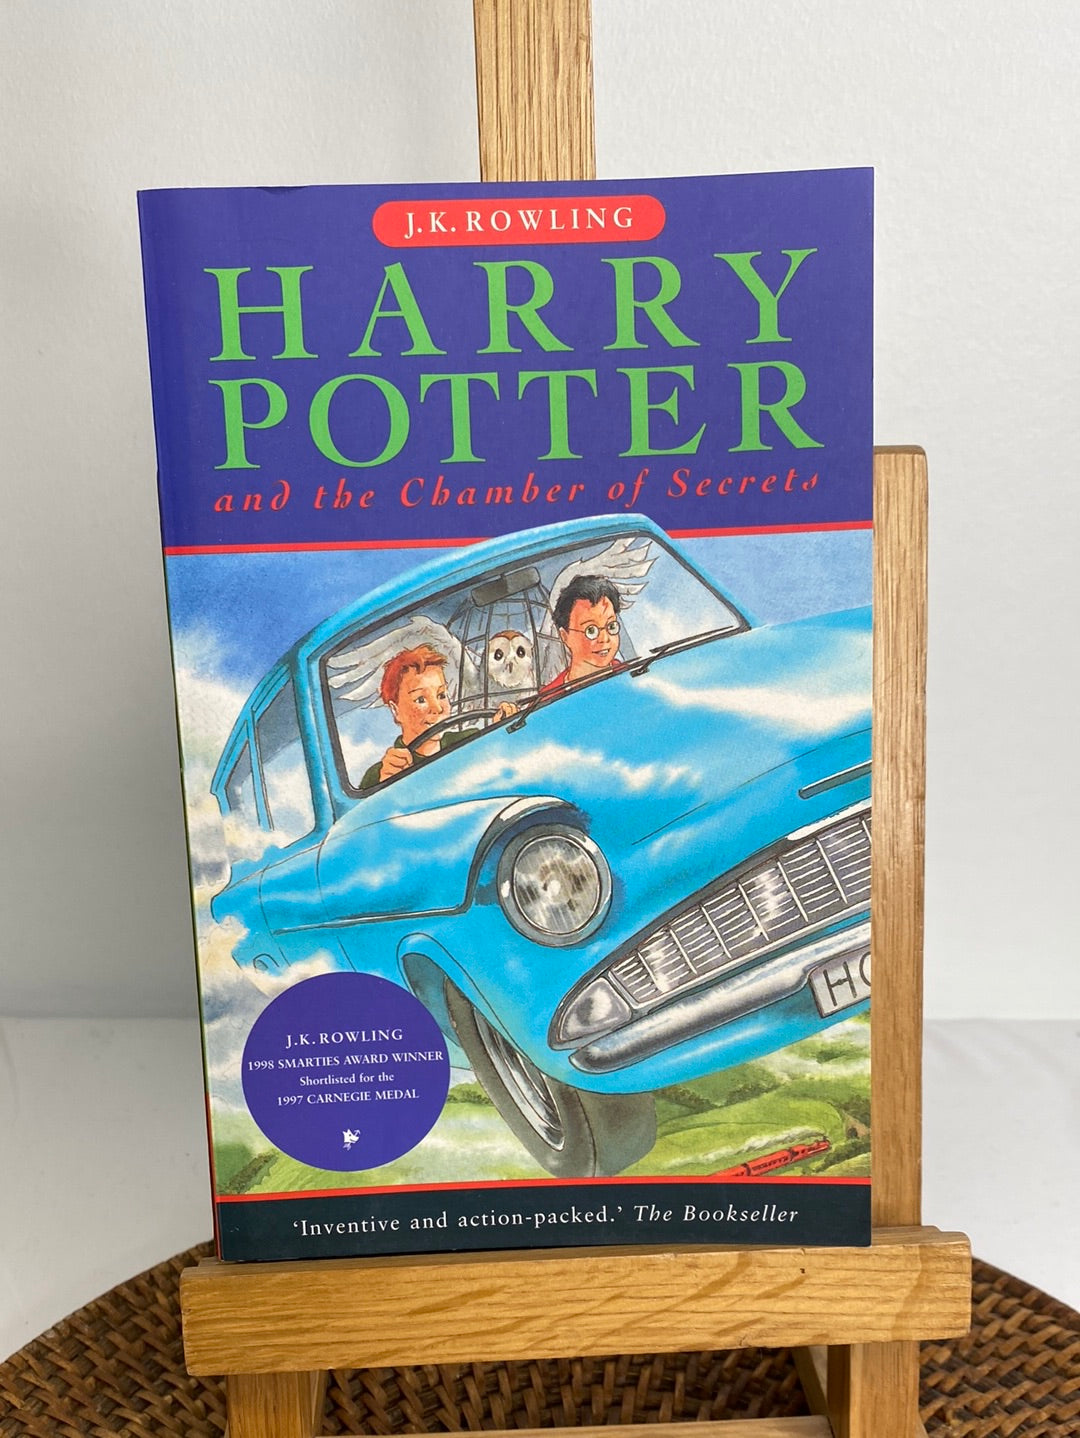 Harry Potter And The Chamber Of Secrets (2nd) Softcover - J.K.Rowling